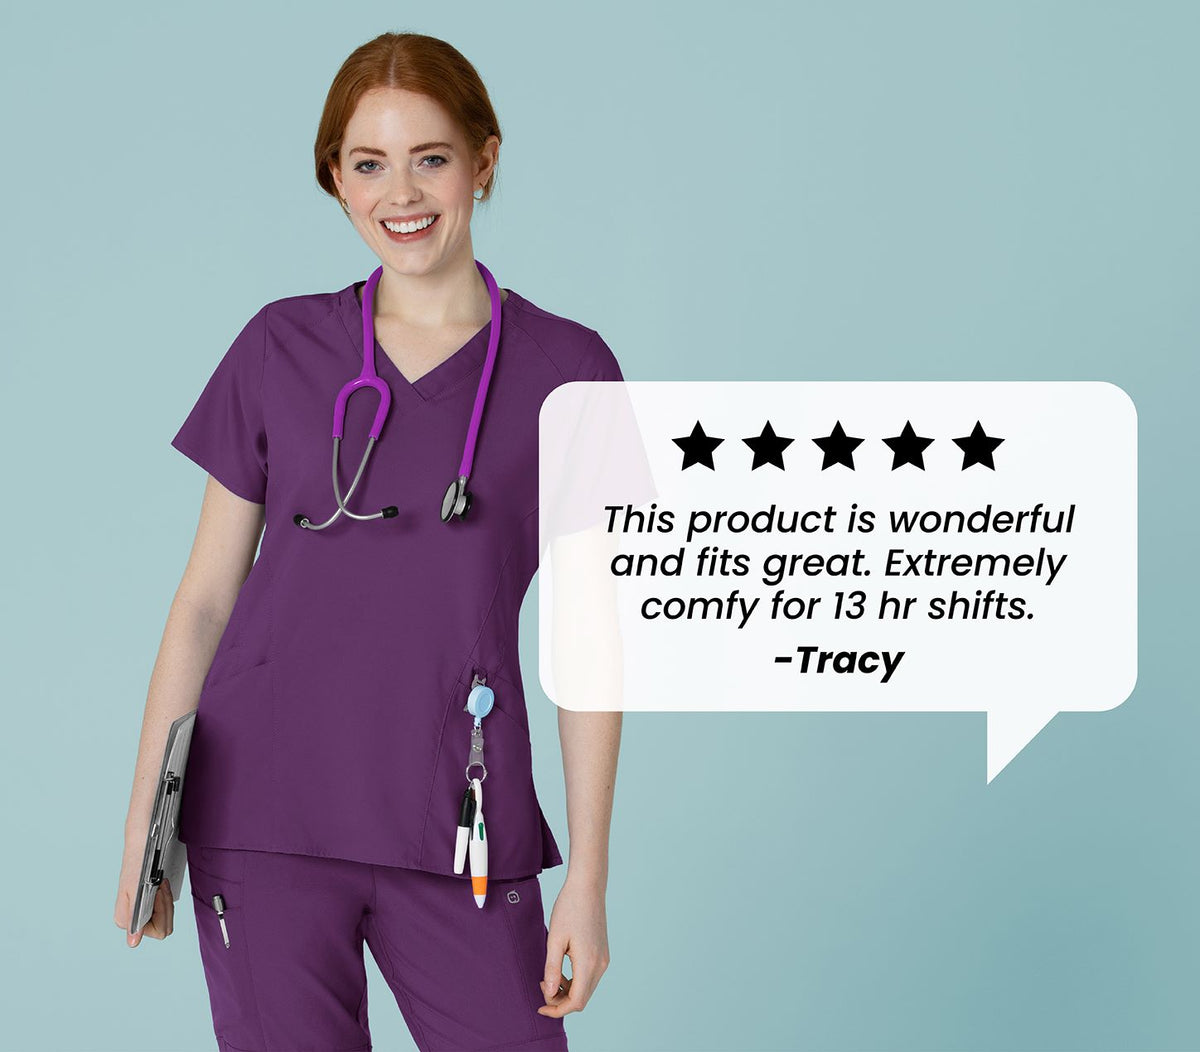 5-stars, "This product is wonderful and fits great. Extremely comfy for 13 hr shifts." - Tracy W123 scrub set in eggplant.